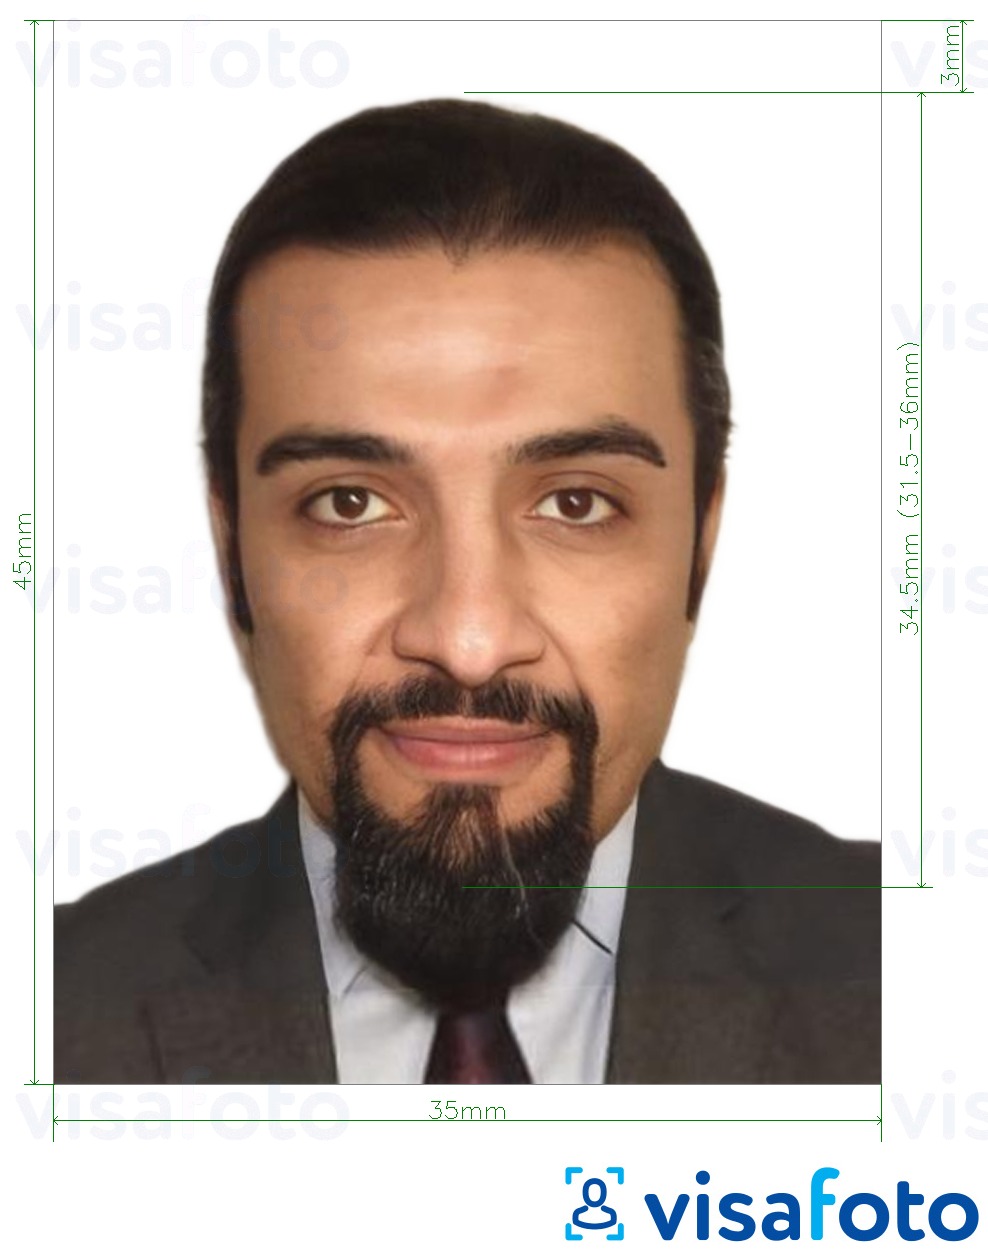 Example of photo for Ethiopia e-visa online 35x45 mm (3.5x4.5 cm) with exact size specification